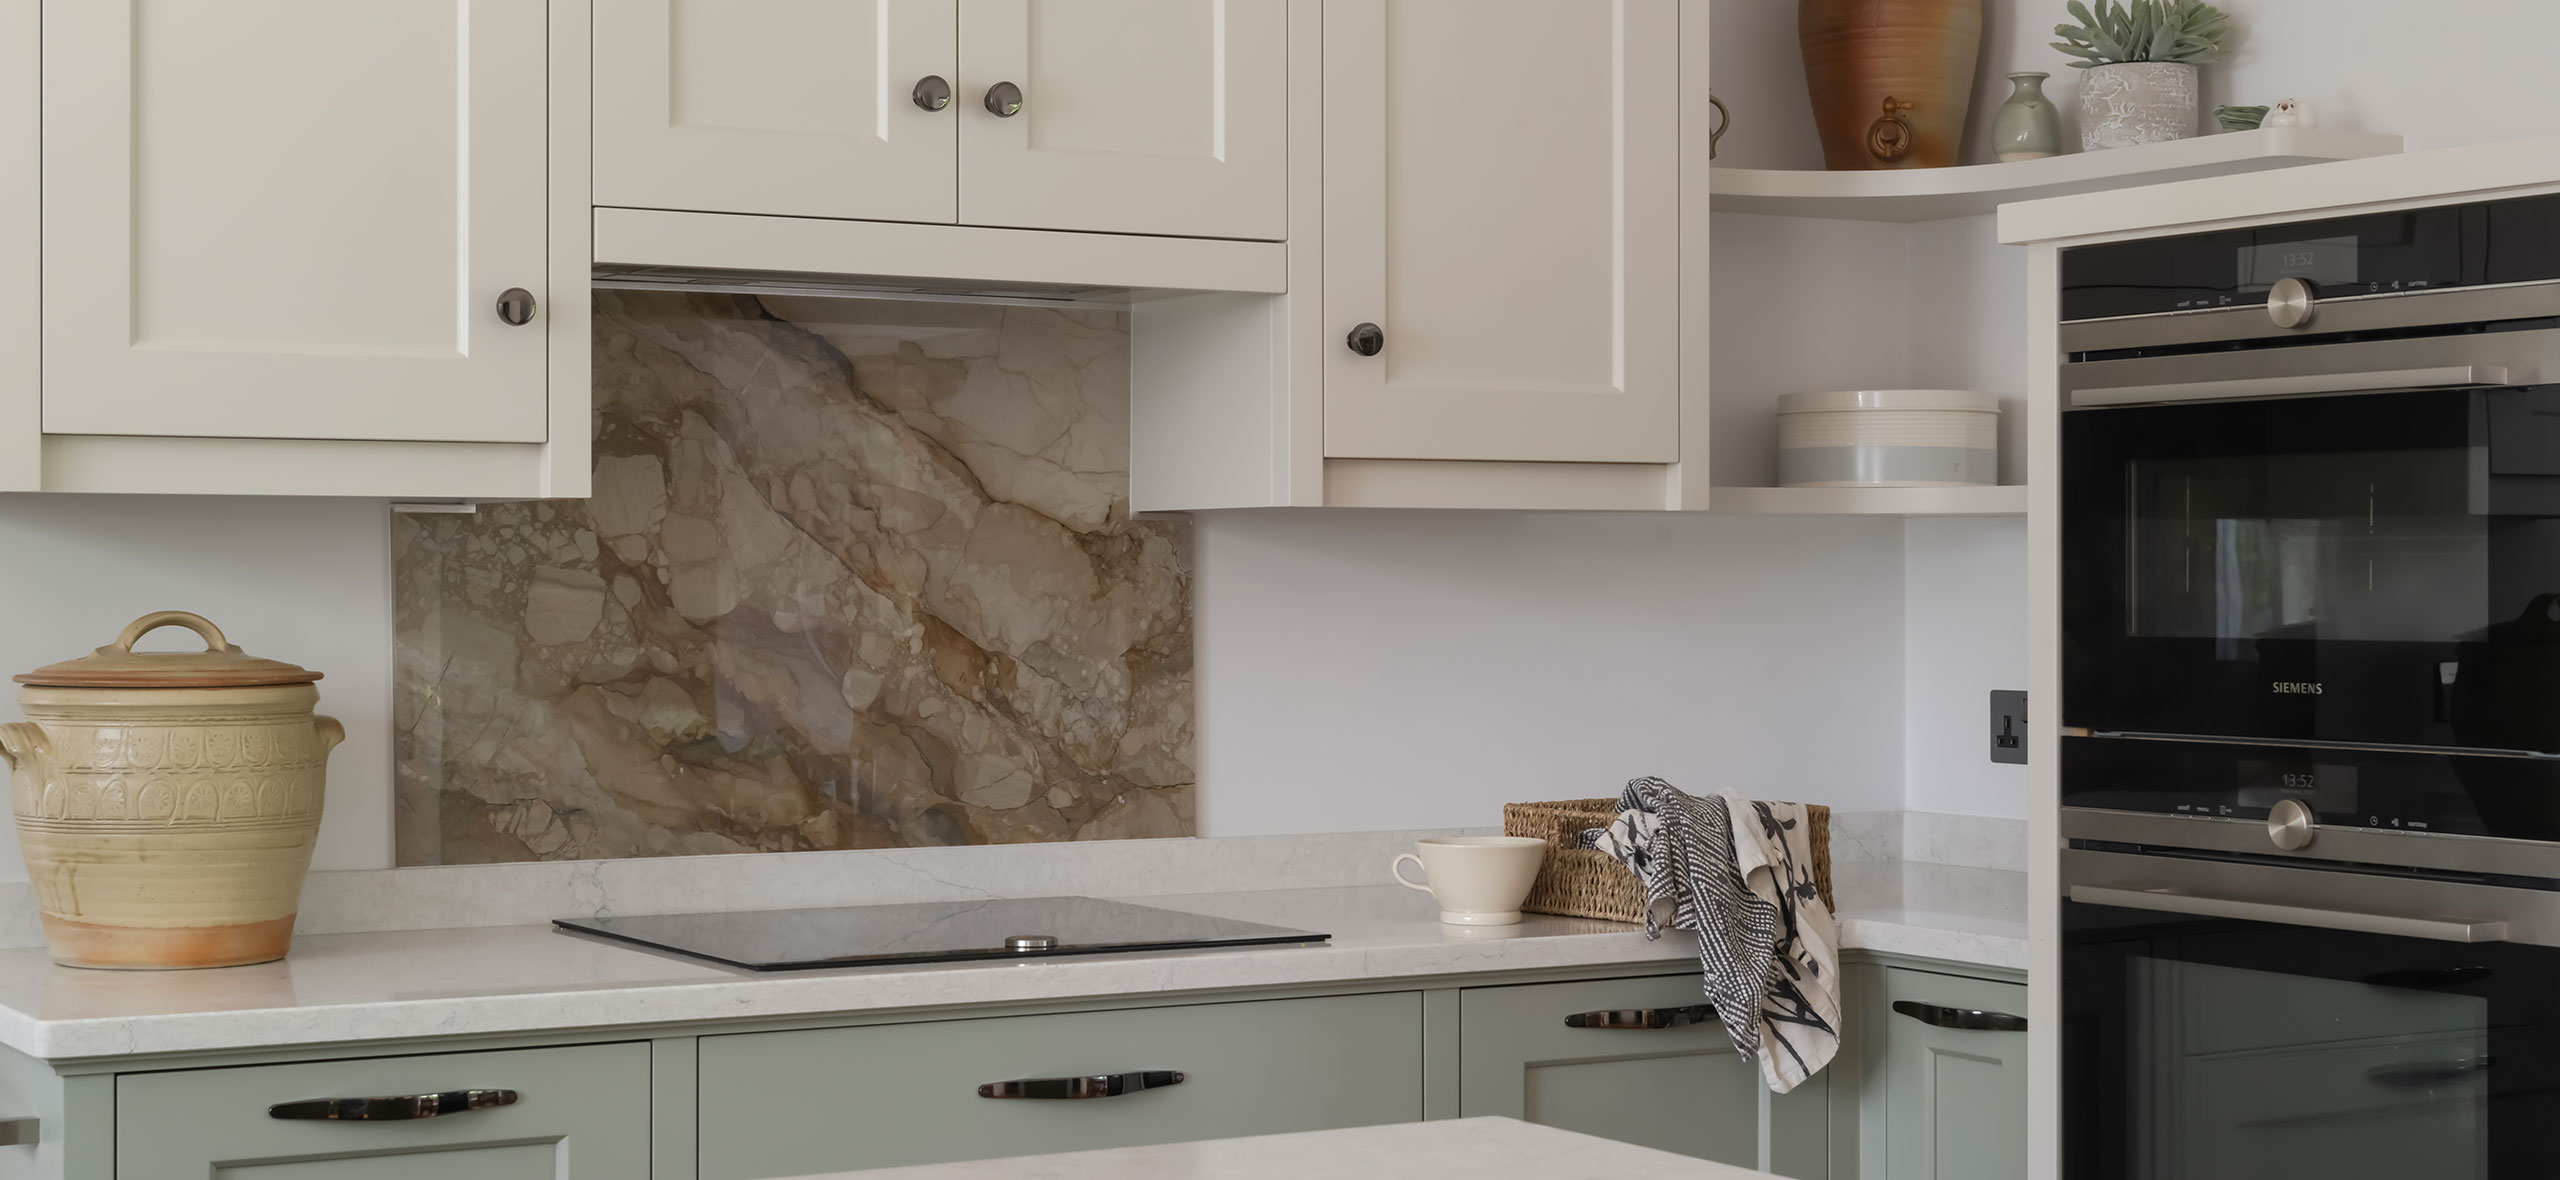 a simple and welcoming kitchen with bespoke curved shelves